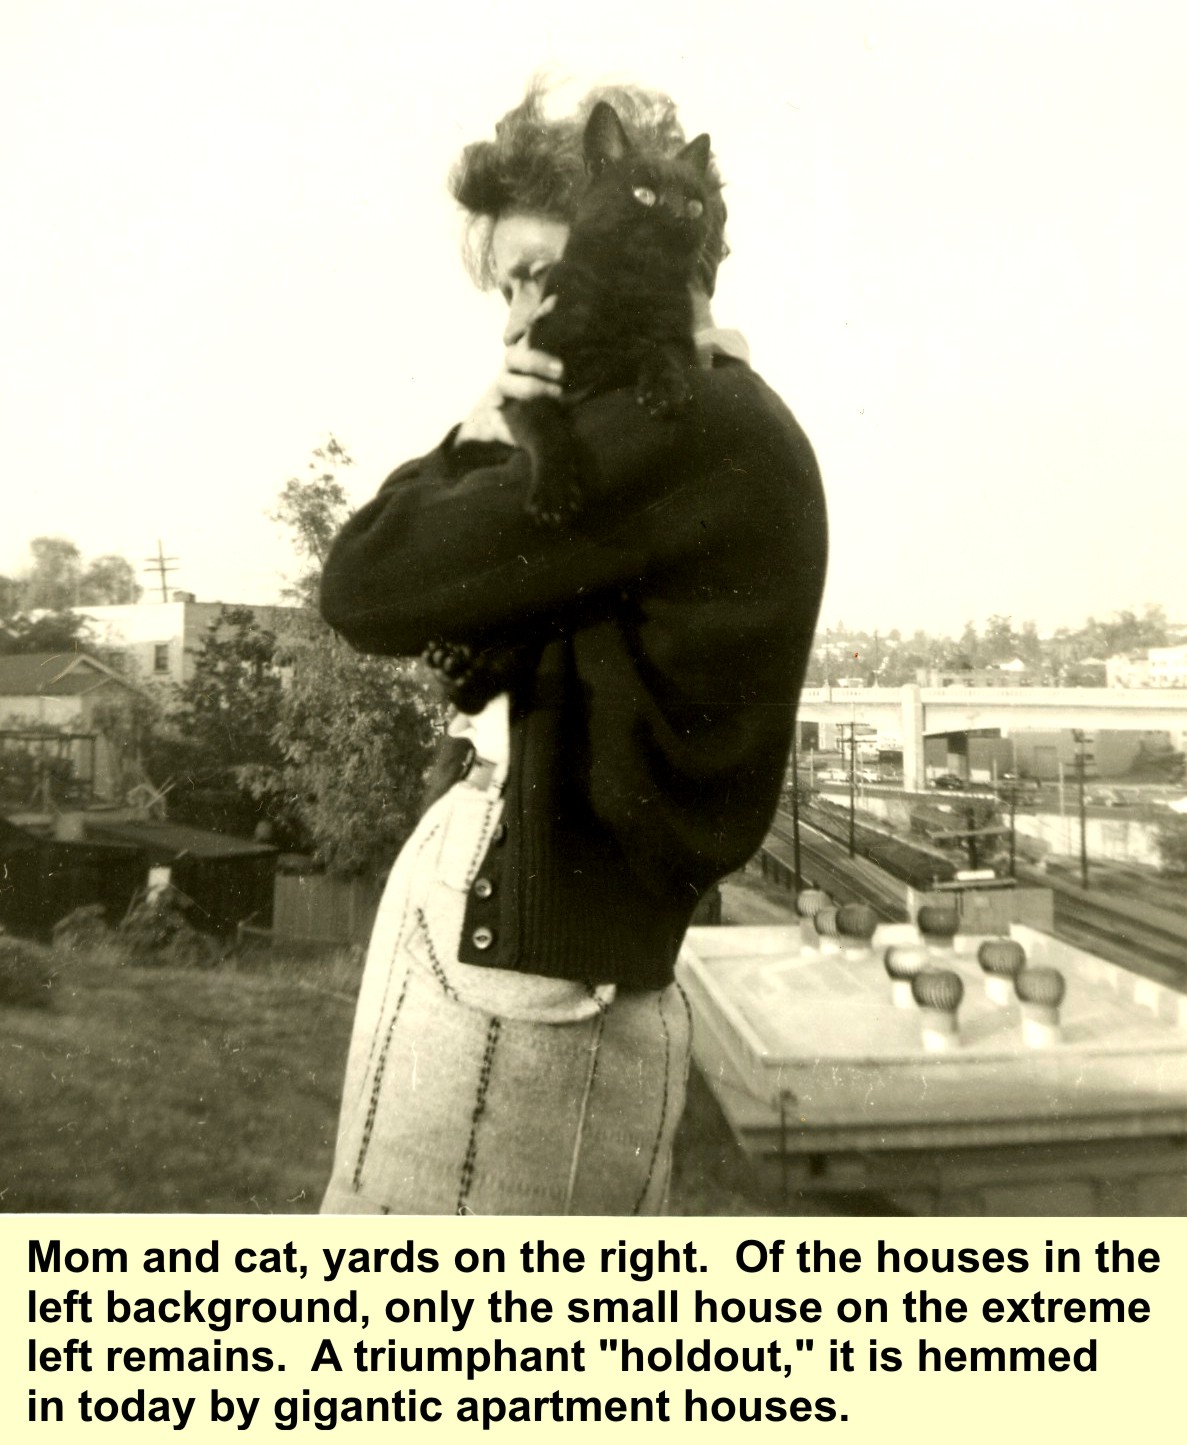 Mom with cat